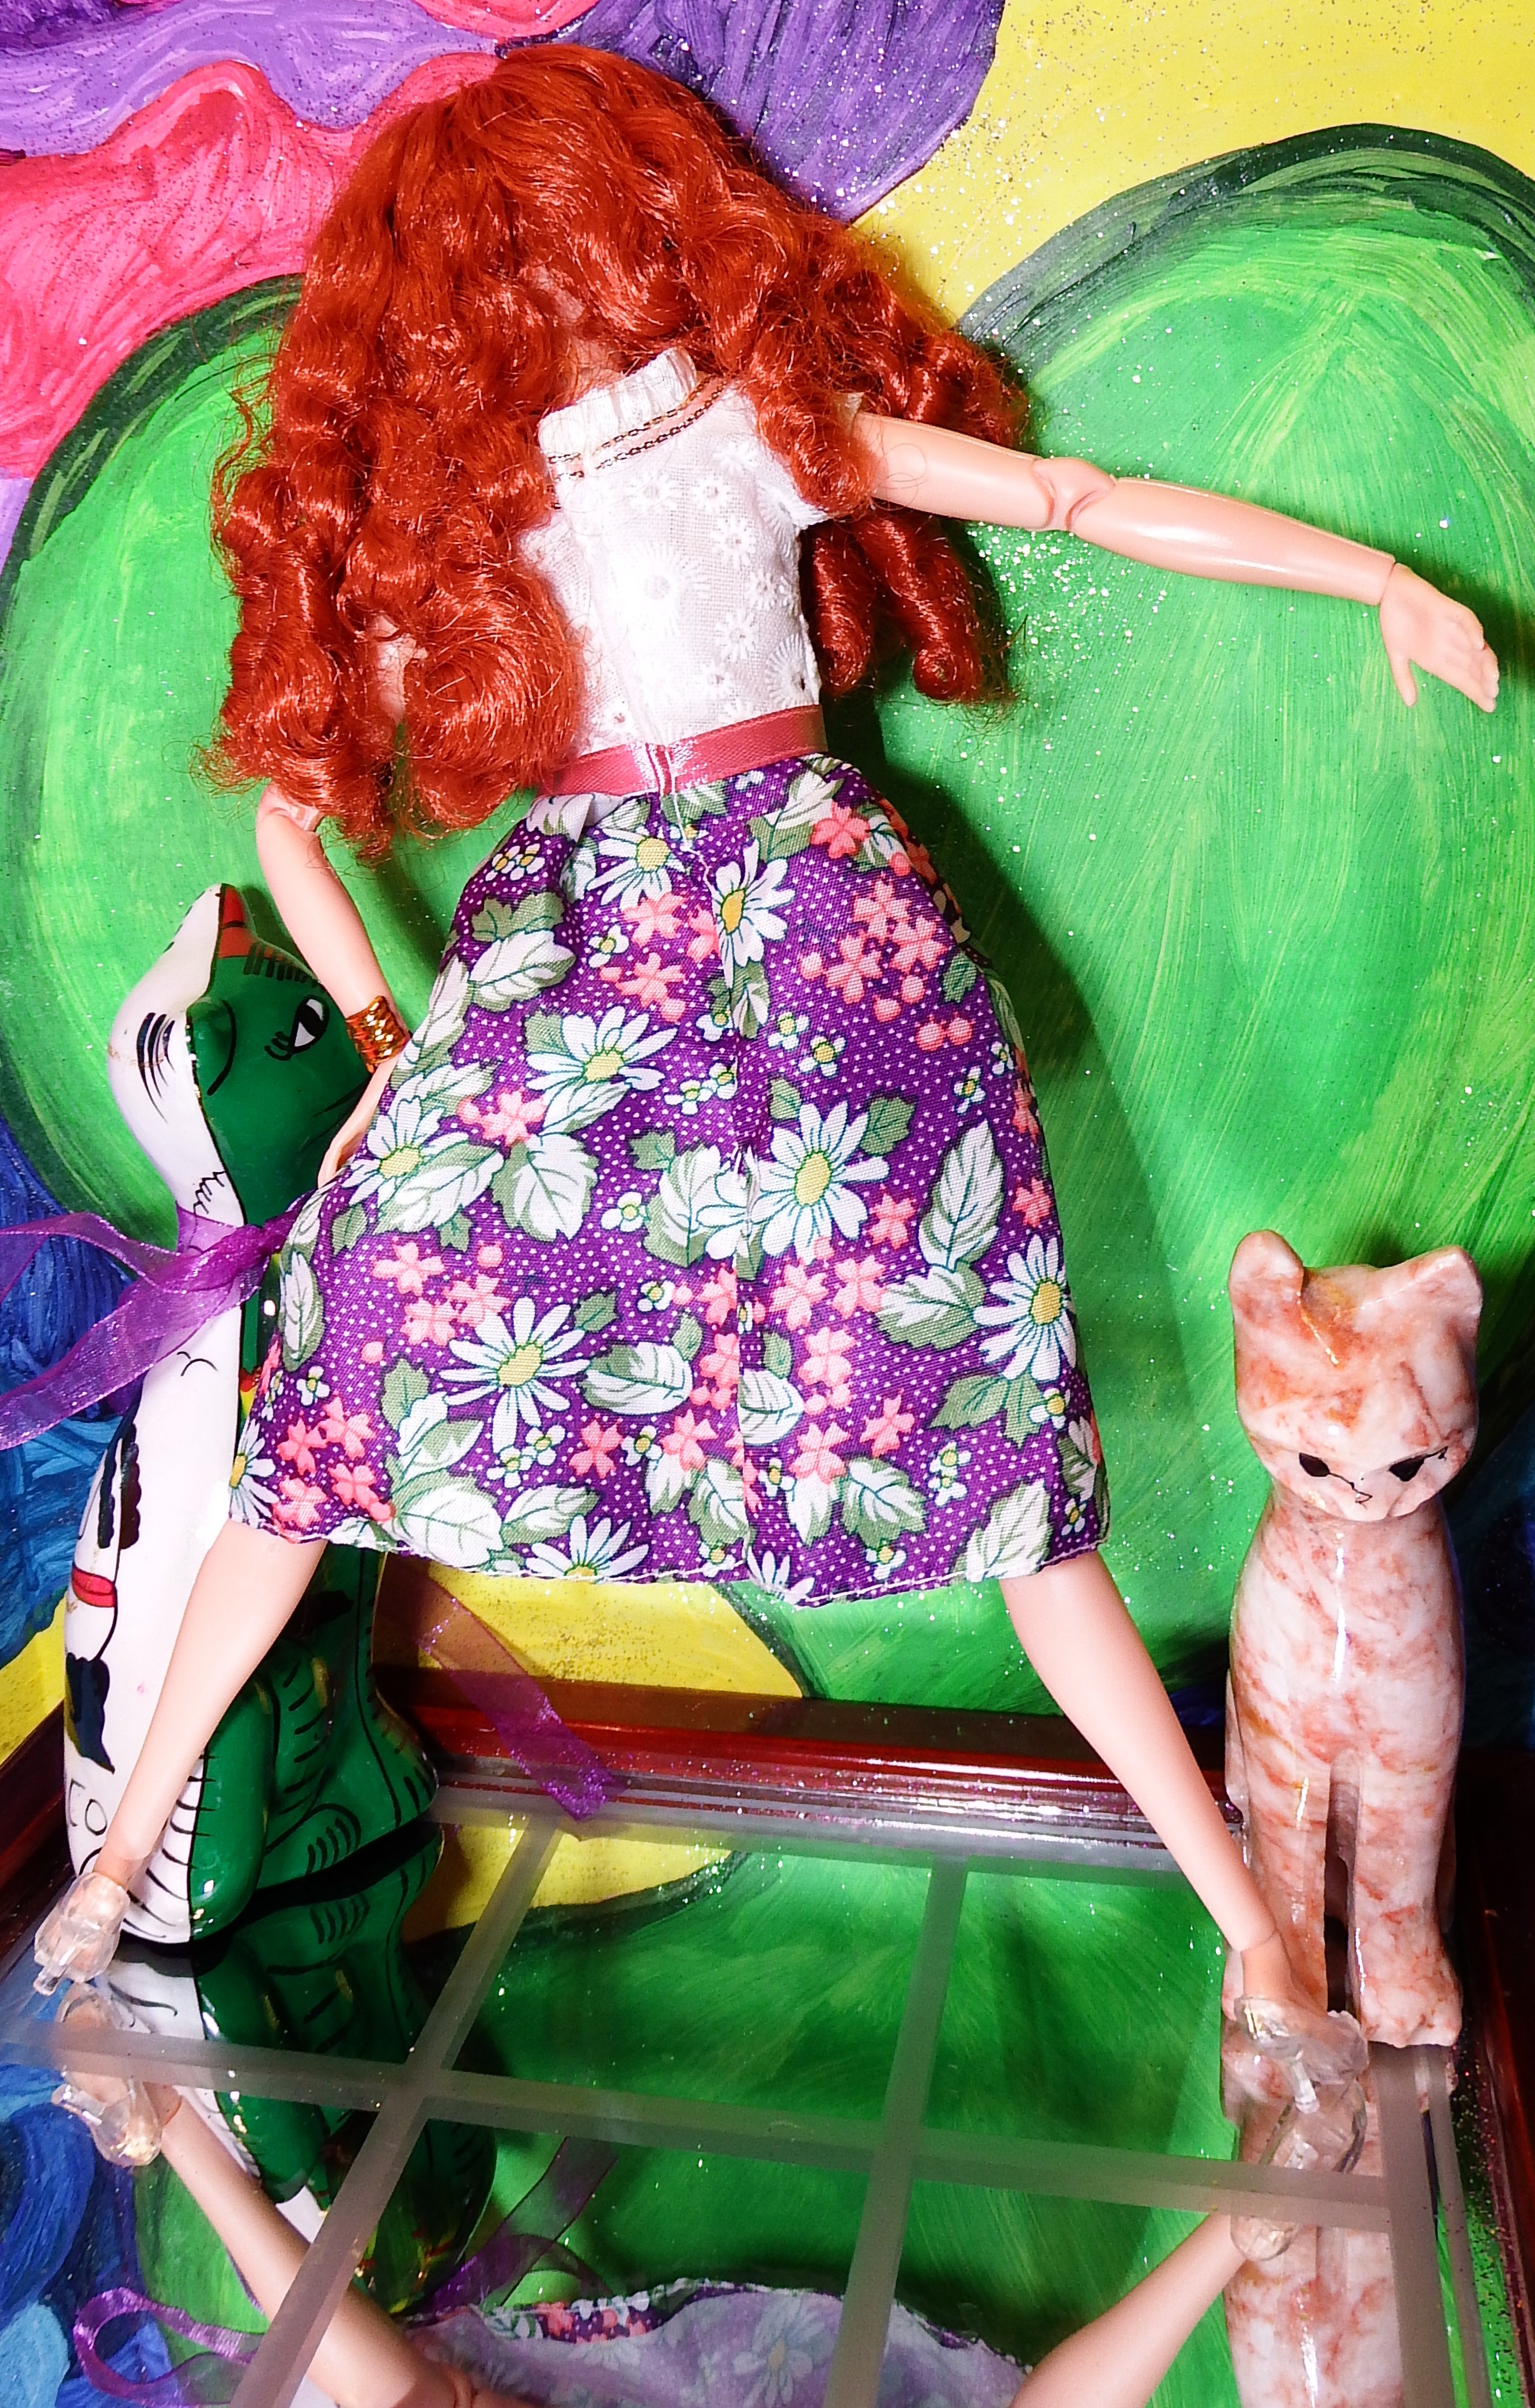 Barbie Red Head in Party Dresses